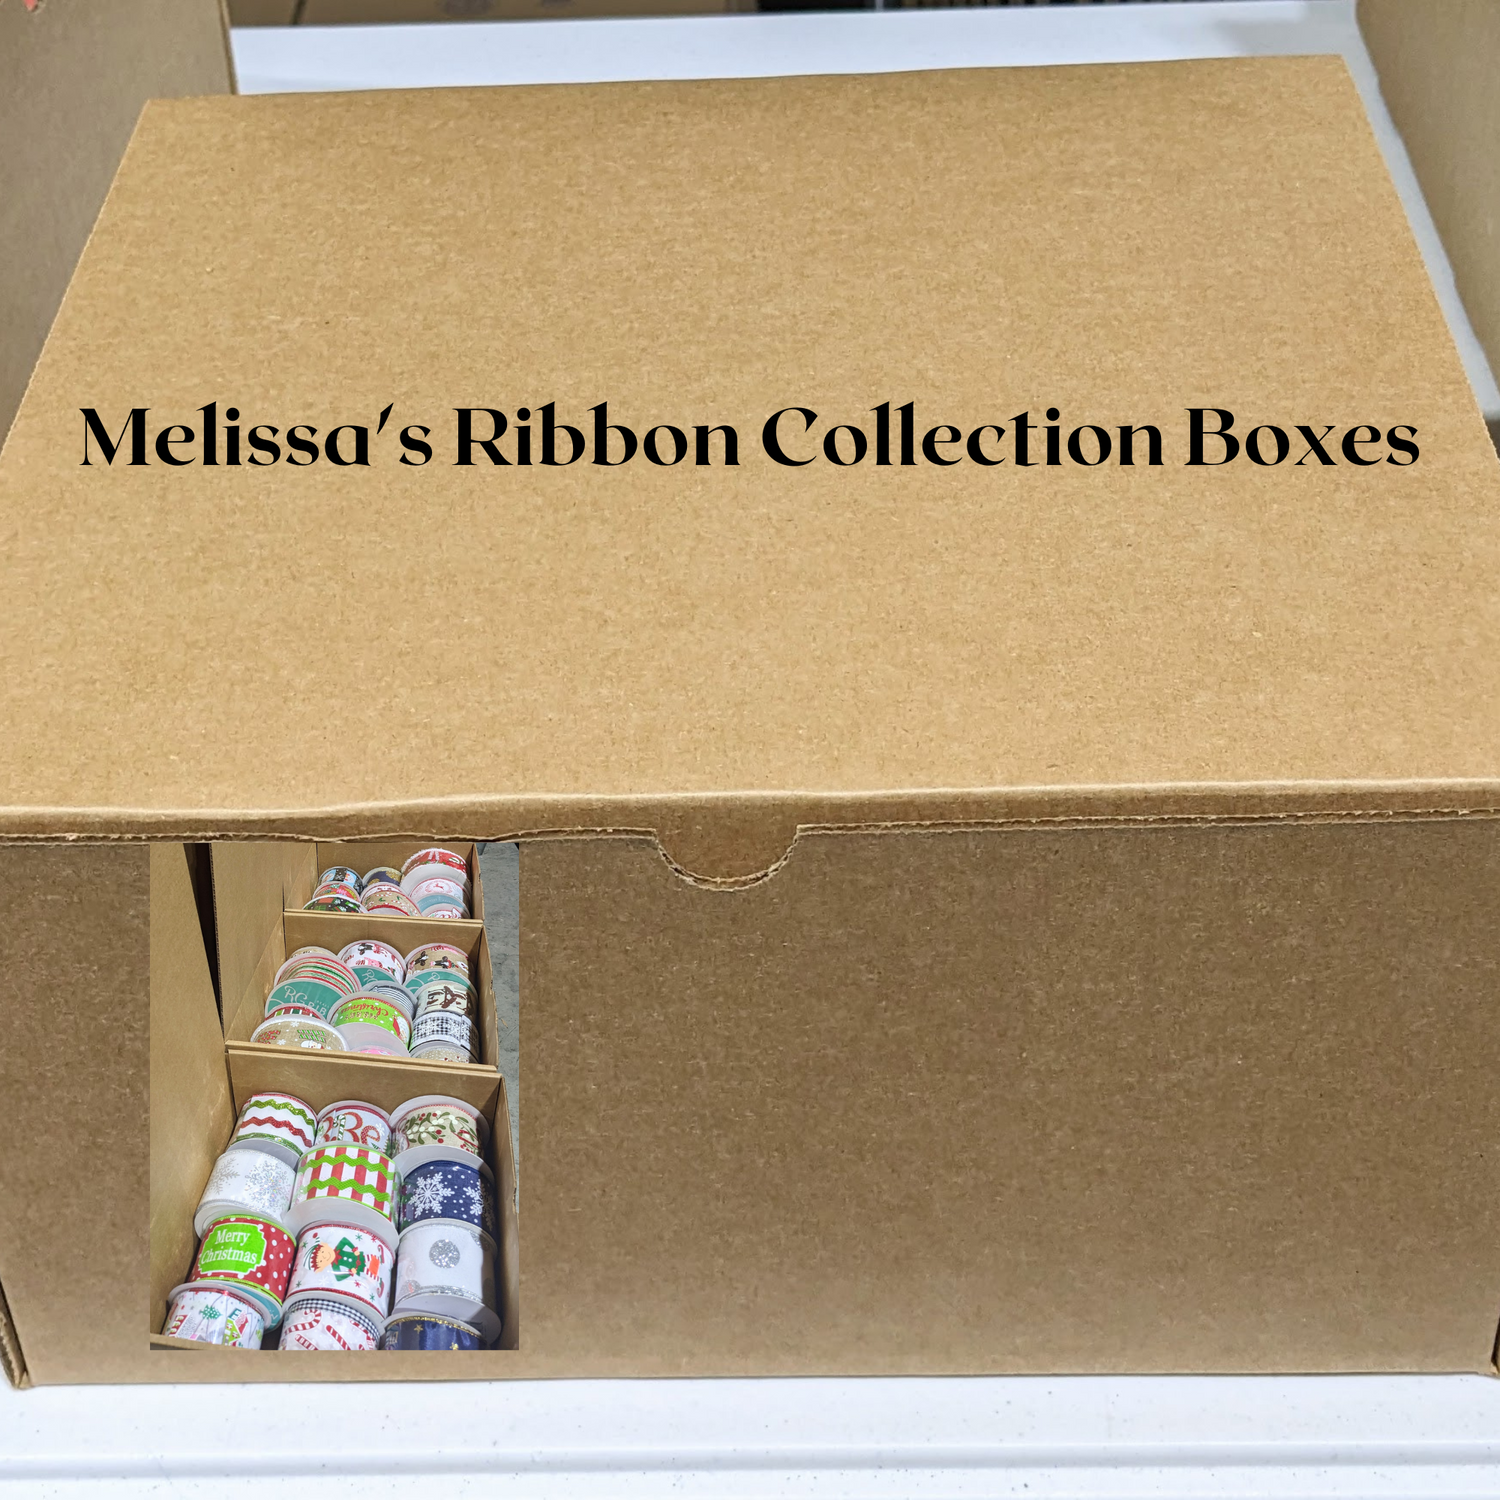 Melissa's ribbon collection boxes